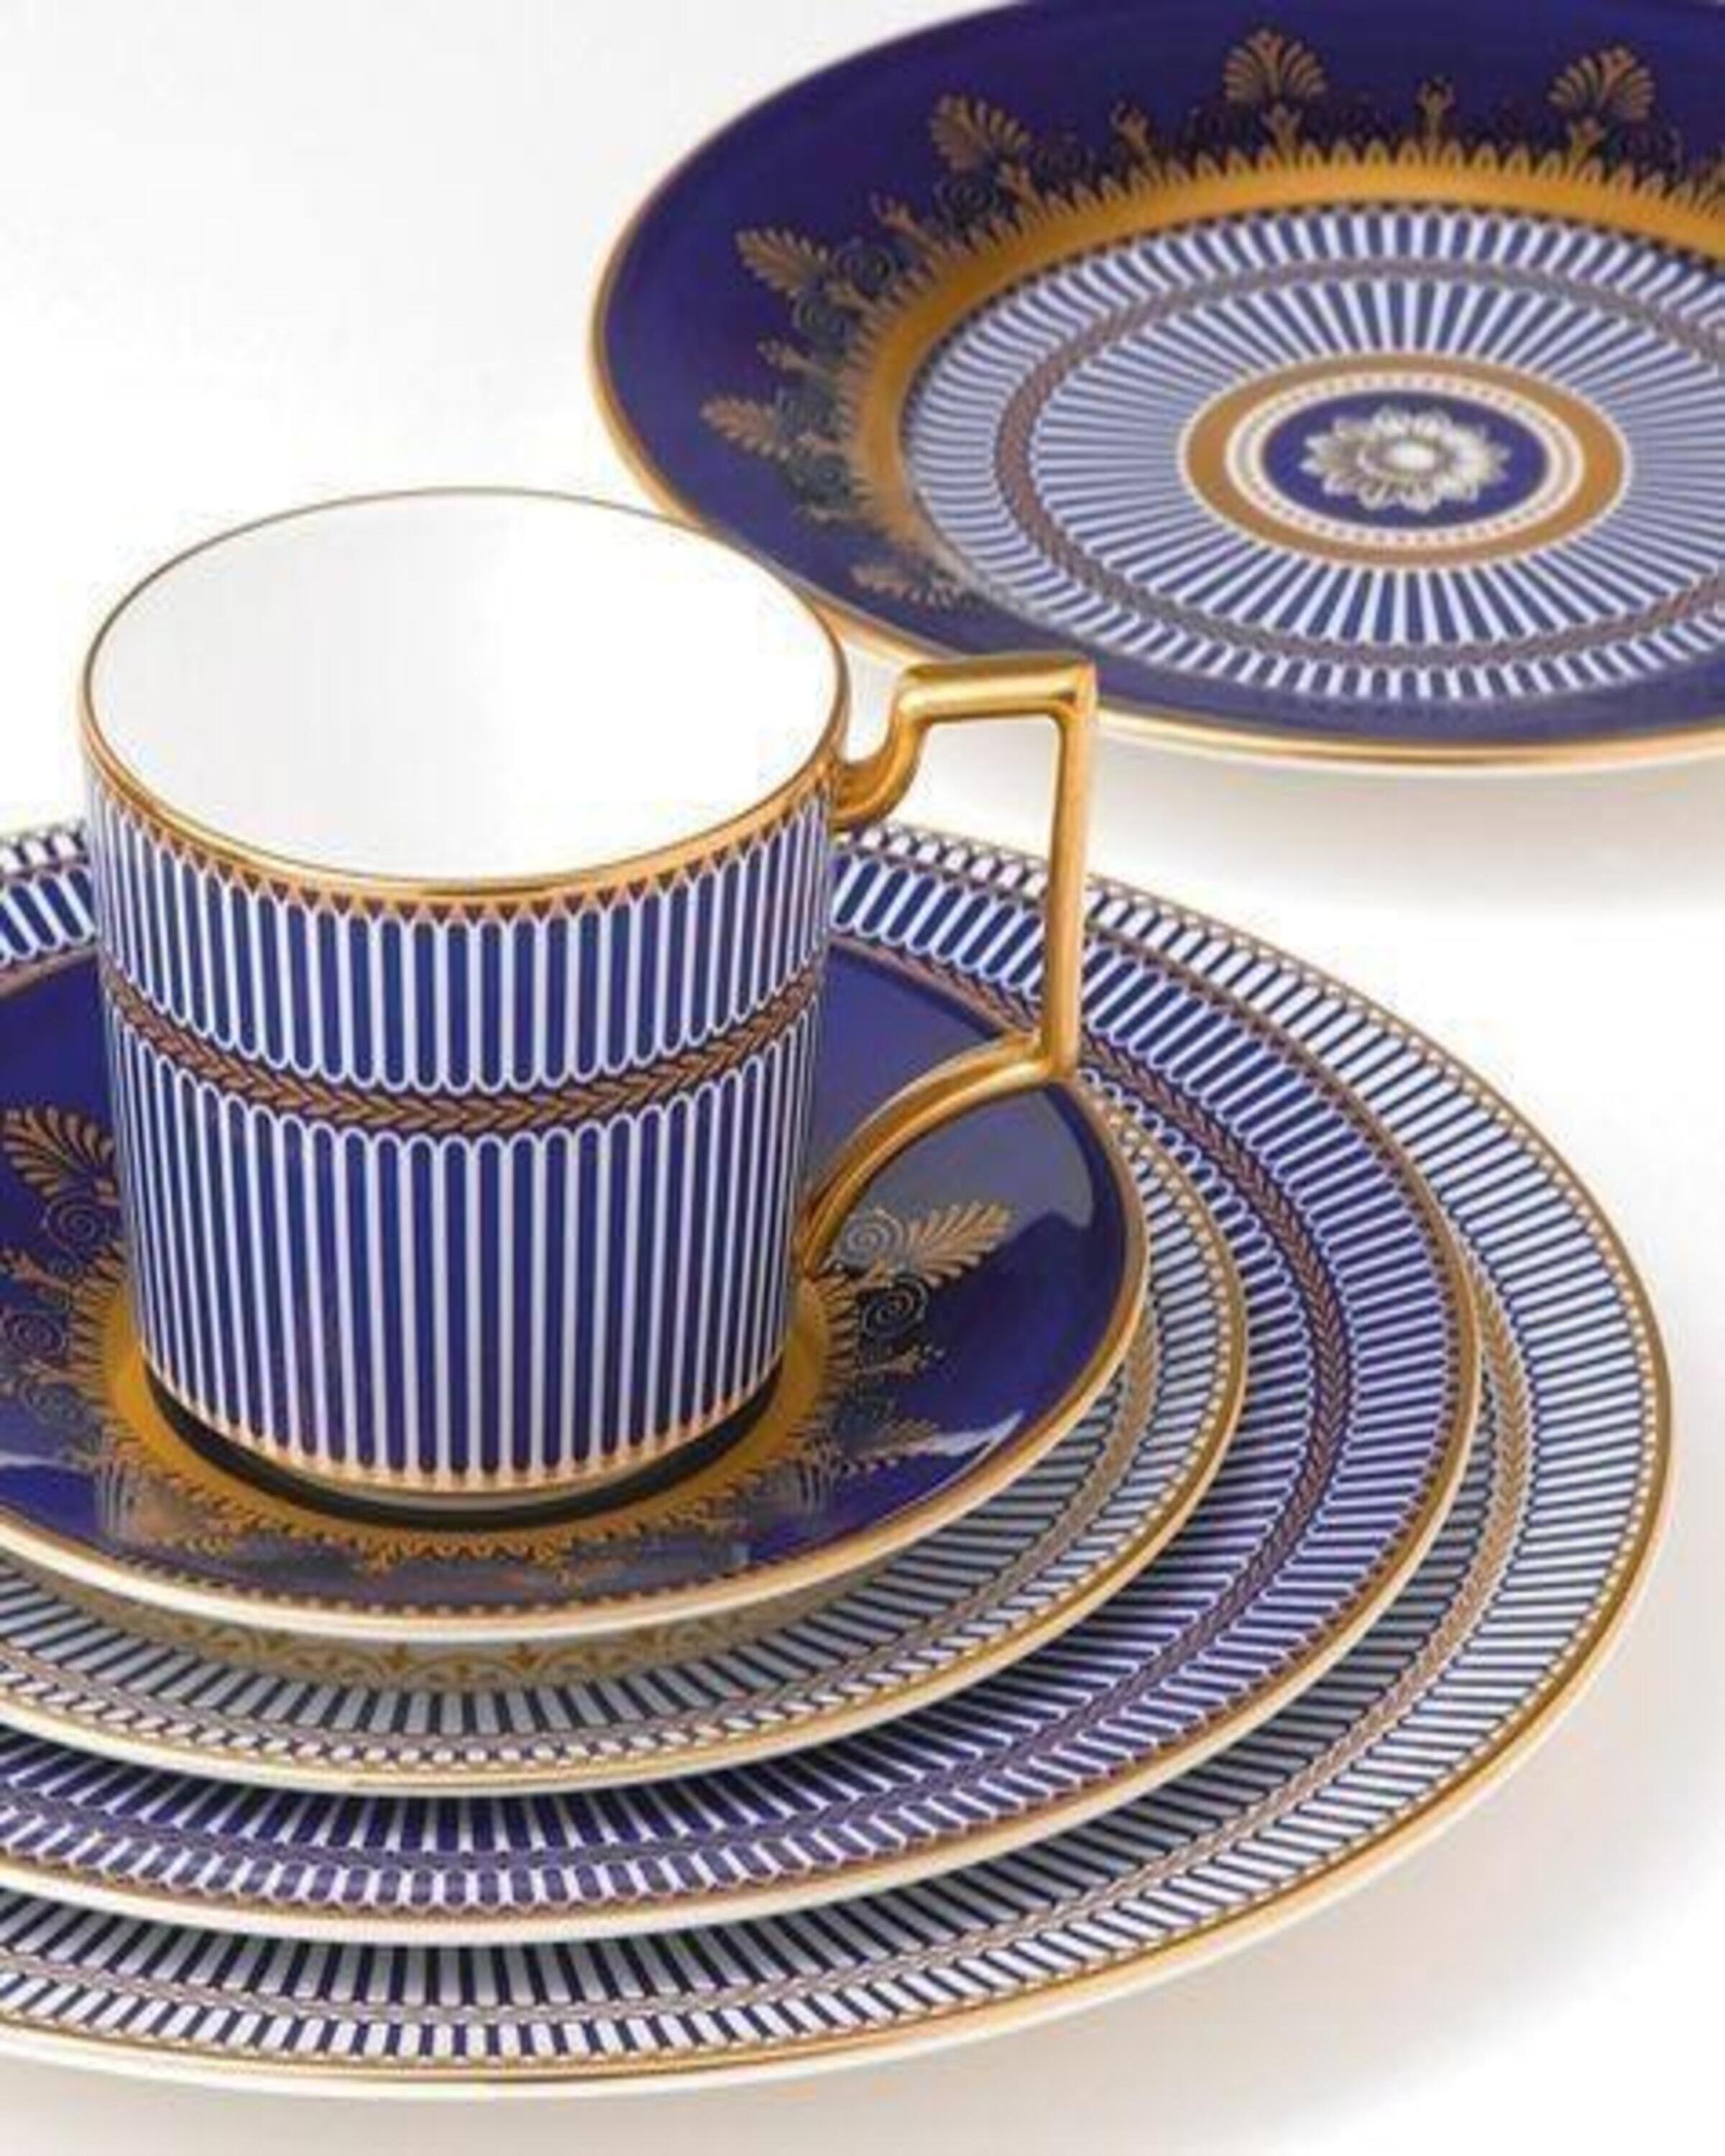 Buy China Tea Cups And Plates Online